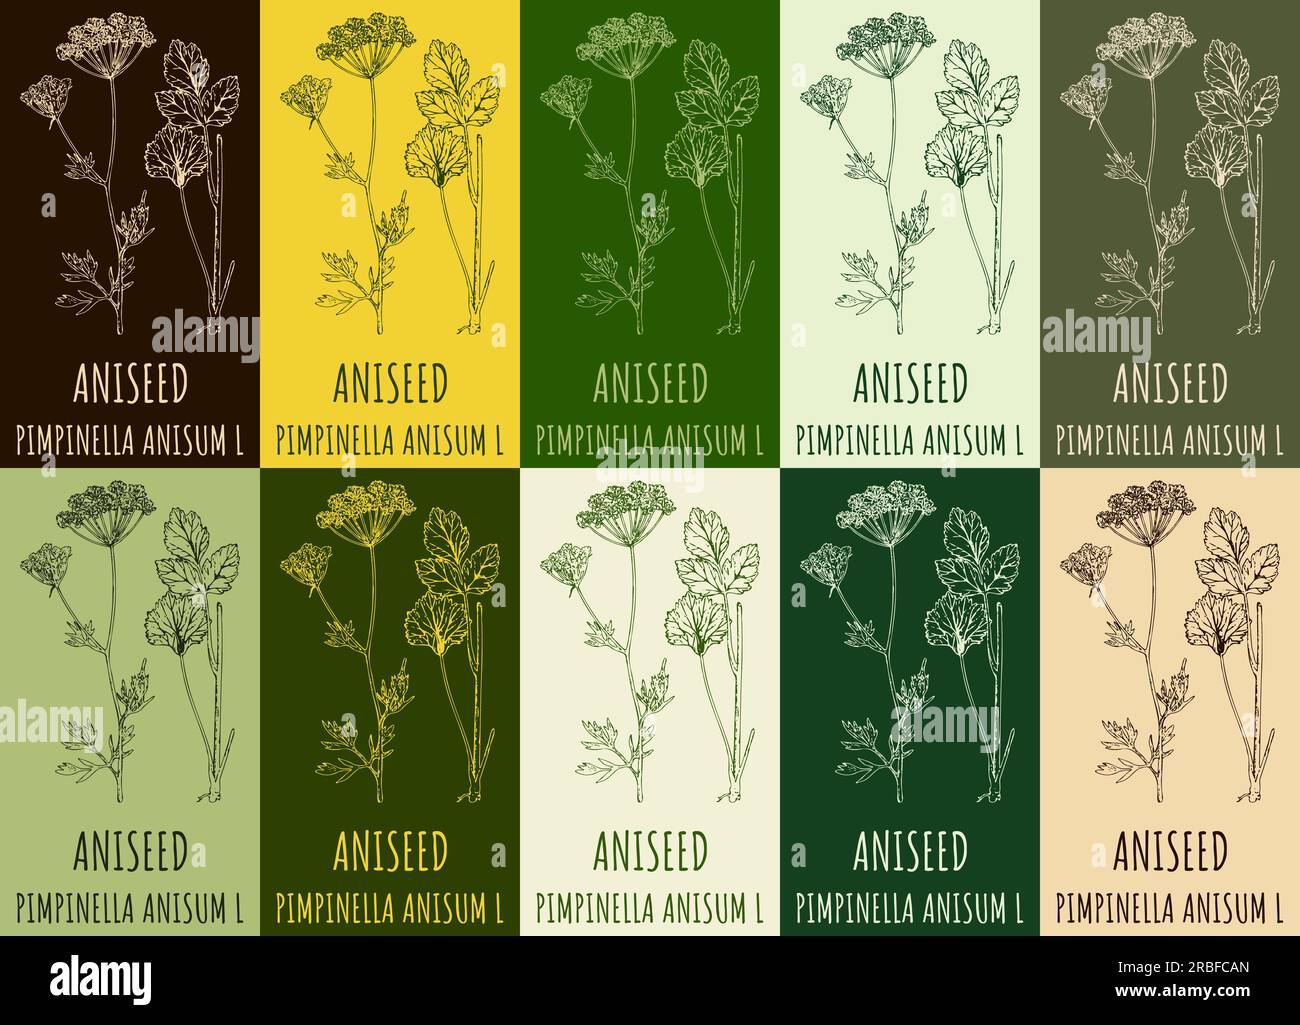 Set of vector drawing ANISEED in various colors. Hand drawn illustration. The Latin name is PIMPINELLA ANISUM L. Stock Photo